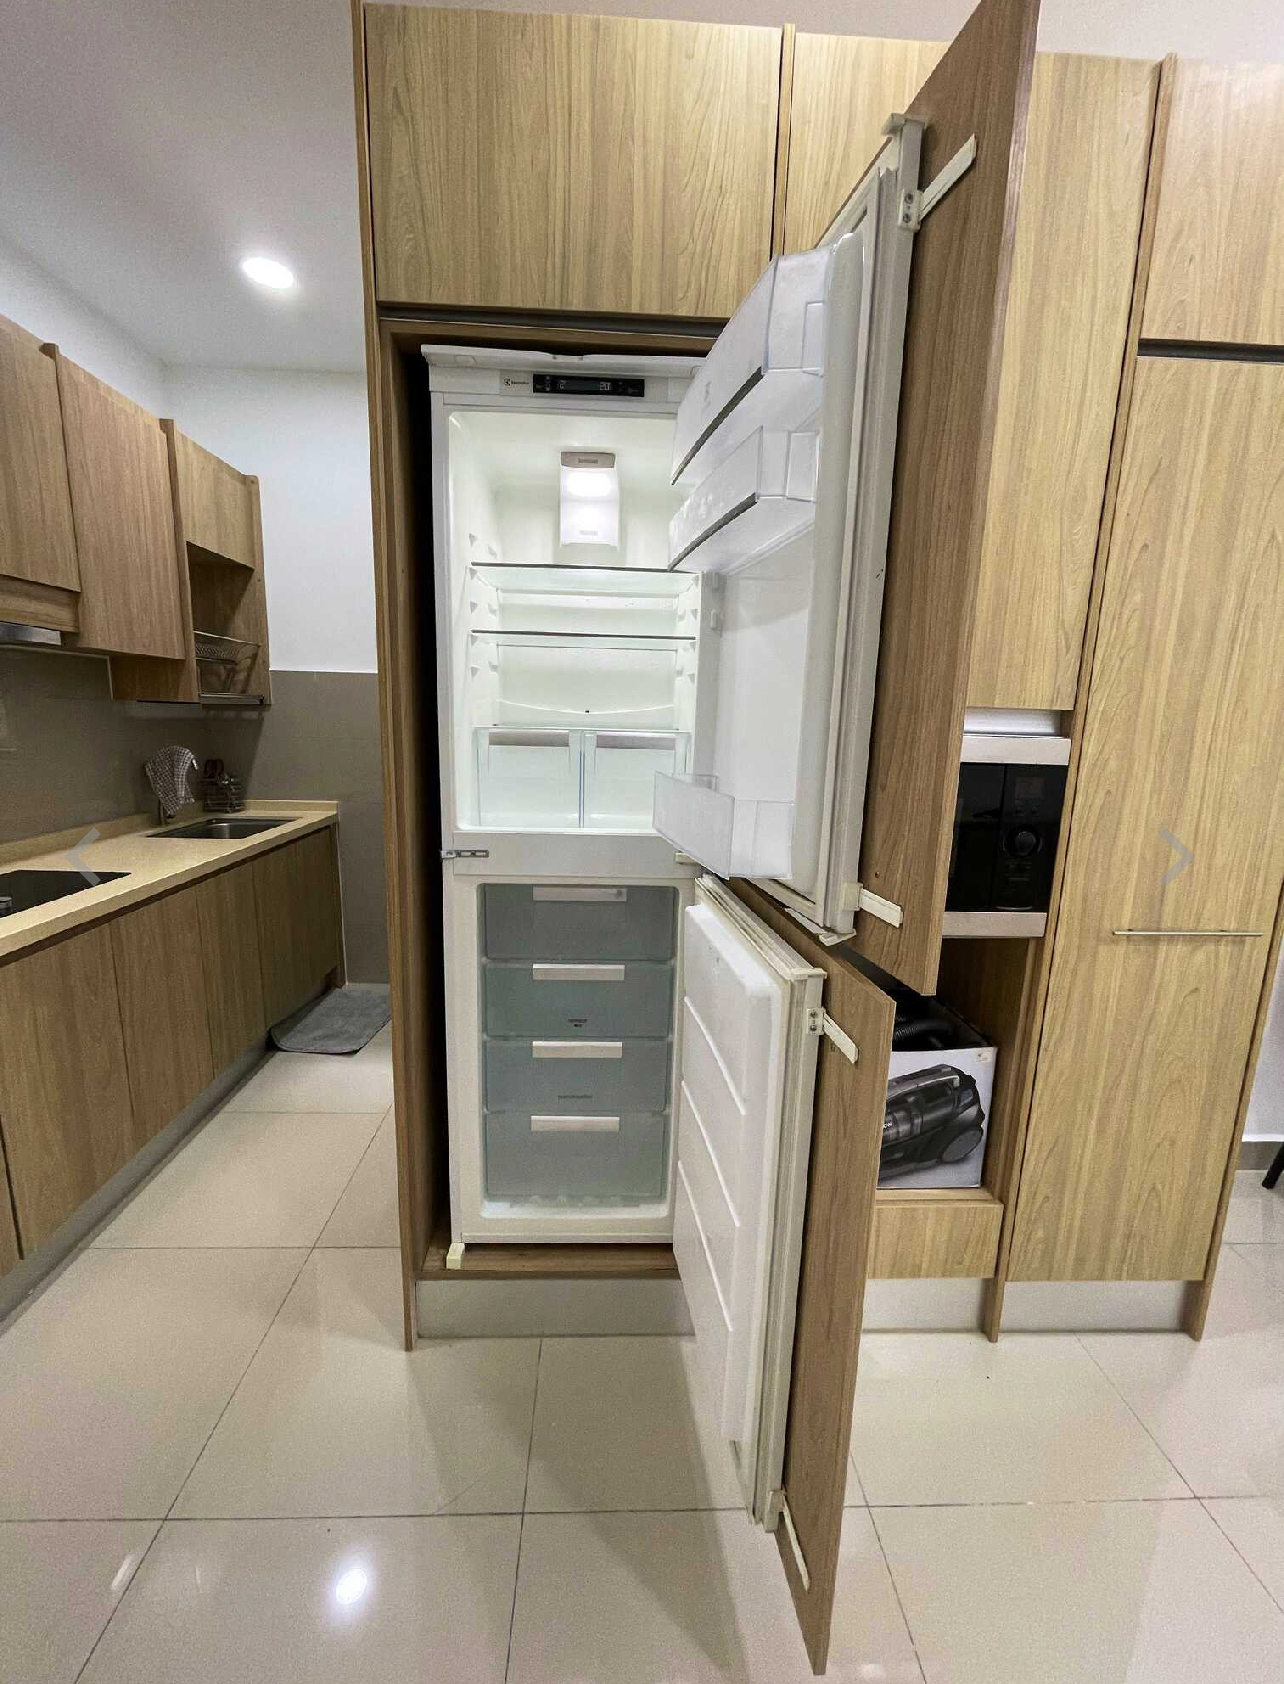 room for rent, studio, zenopy residences lobby road, Send the owner a message on WhatsApp/facebook if you want to RENT the unit facebook (Mohammed Nhat)&Telegram(@muhammednhat101) Fully furnished non sharing :(comfortable)